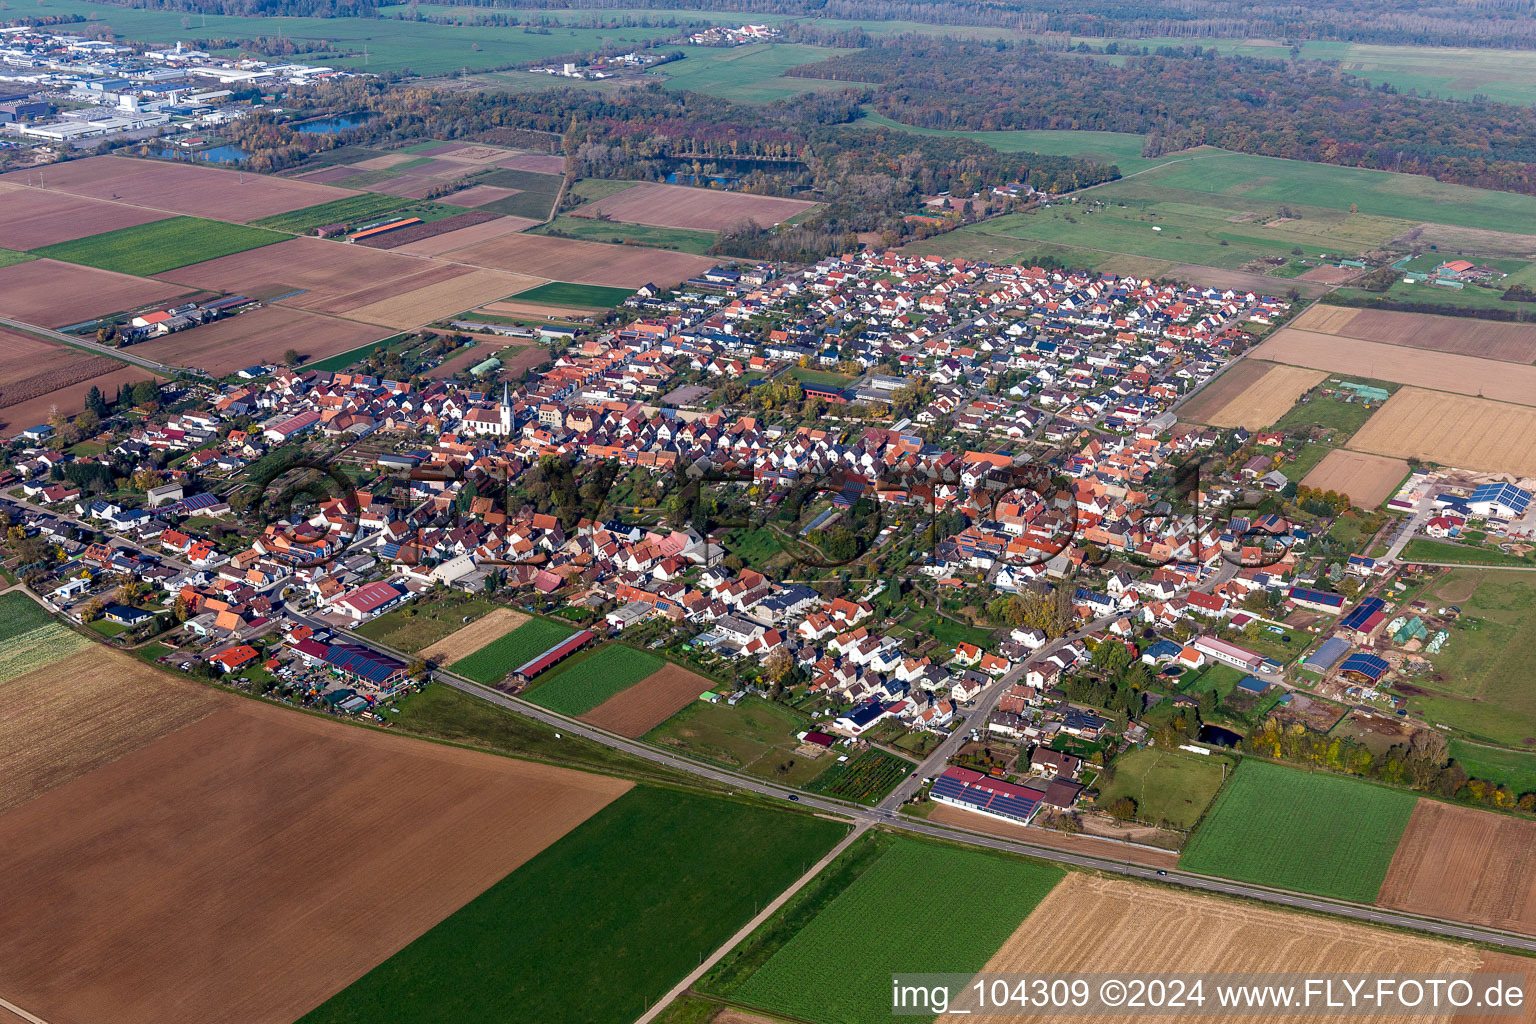 Aerial view of Village - view on the edge of agricultural fields and farmland in Ottersheim bei Landau in the state Rhineland-Palatinate, Germany